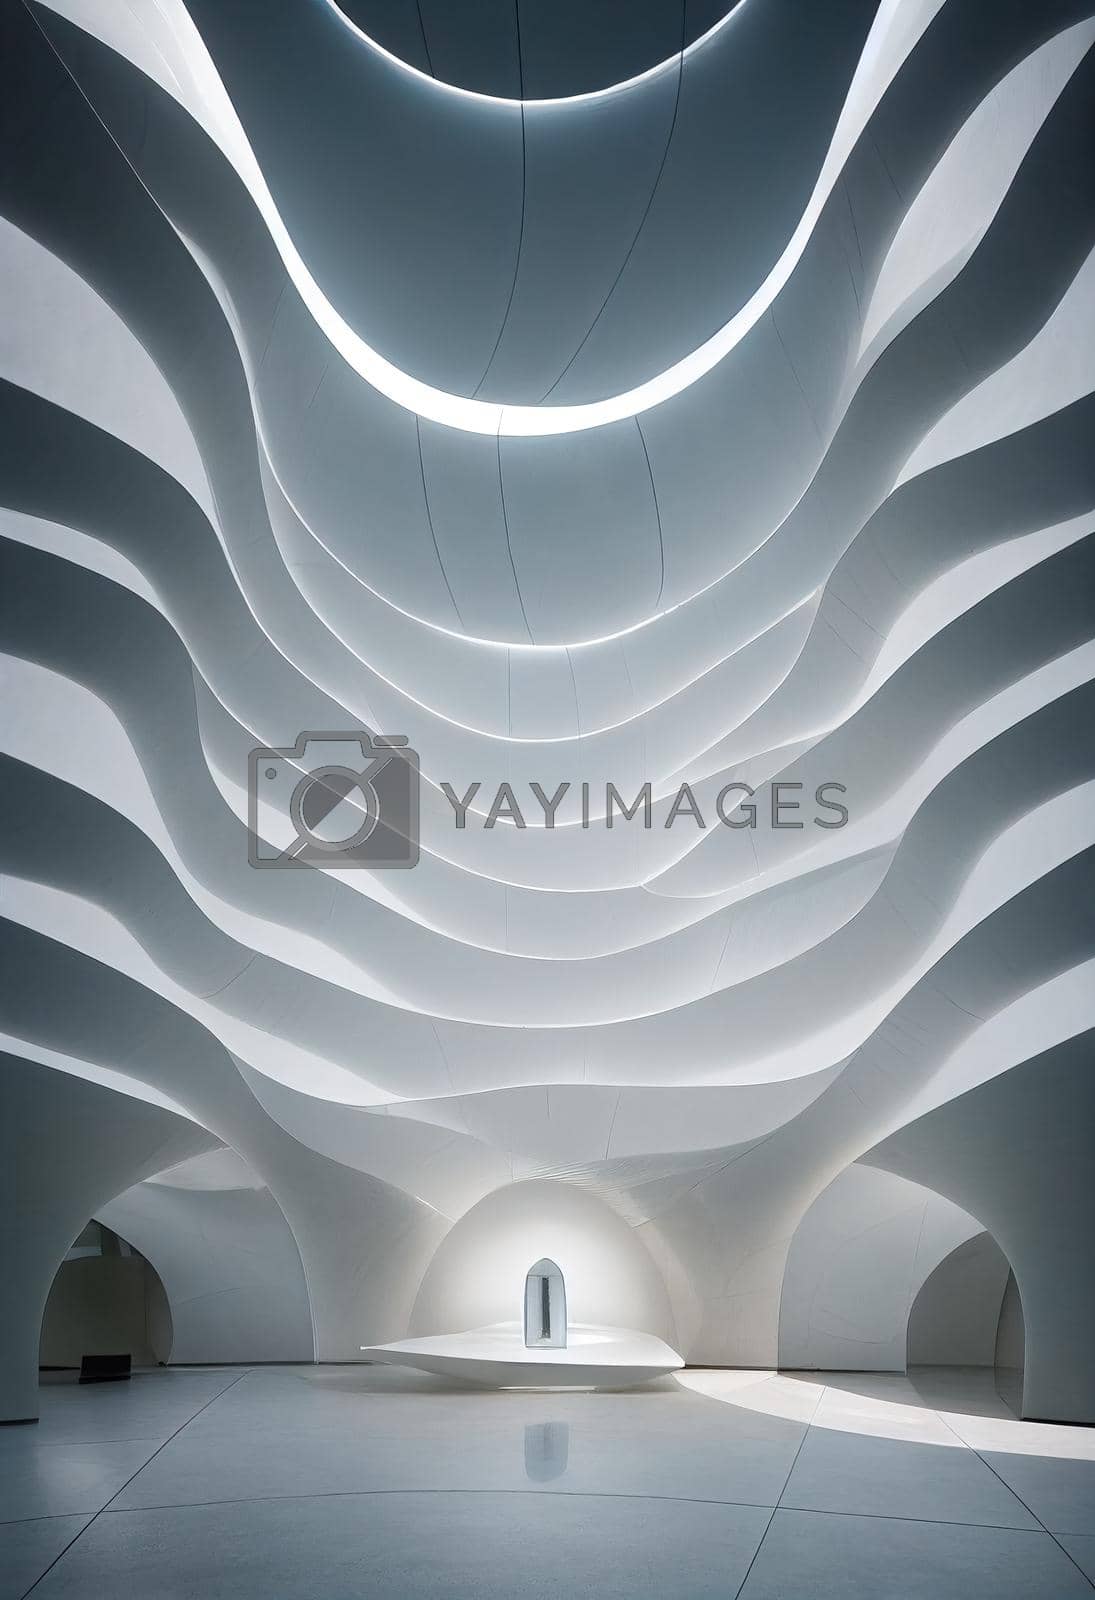 Royalty free image of Interior shot of a modern contemporary futuristic chapel, 3d render by Farcas